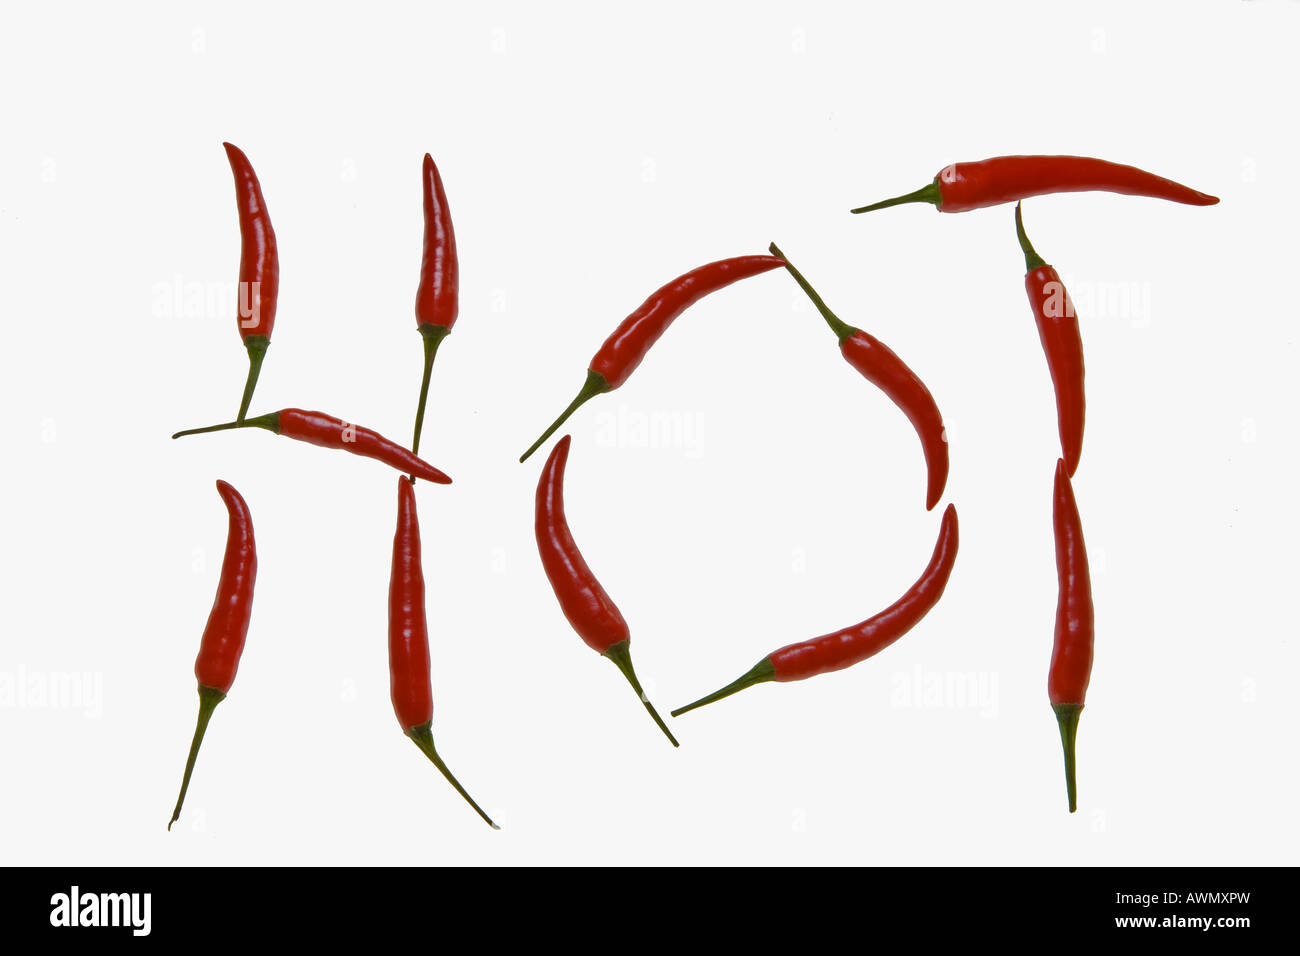 Red chili peppers, formed to spell 'HOT' Stock Photo